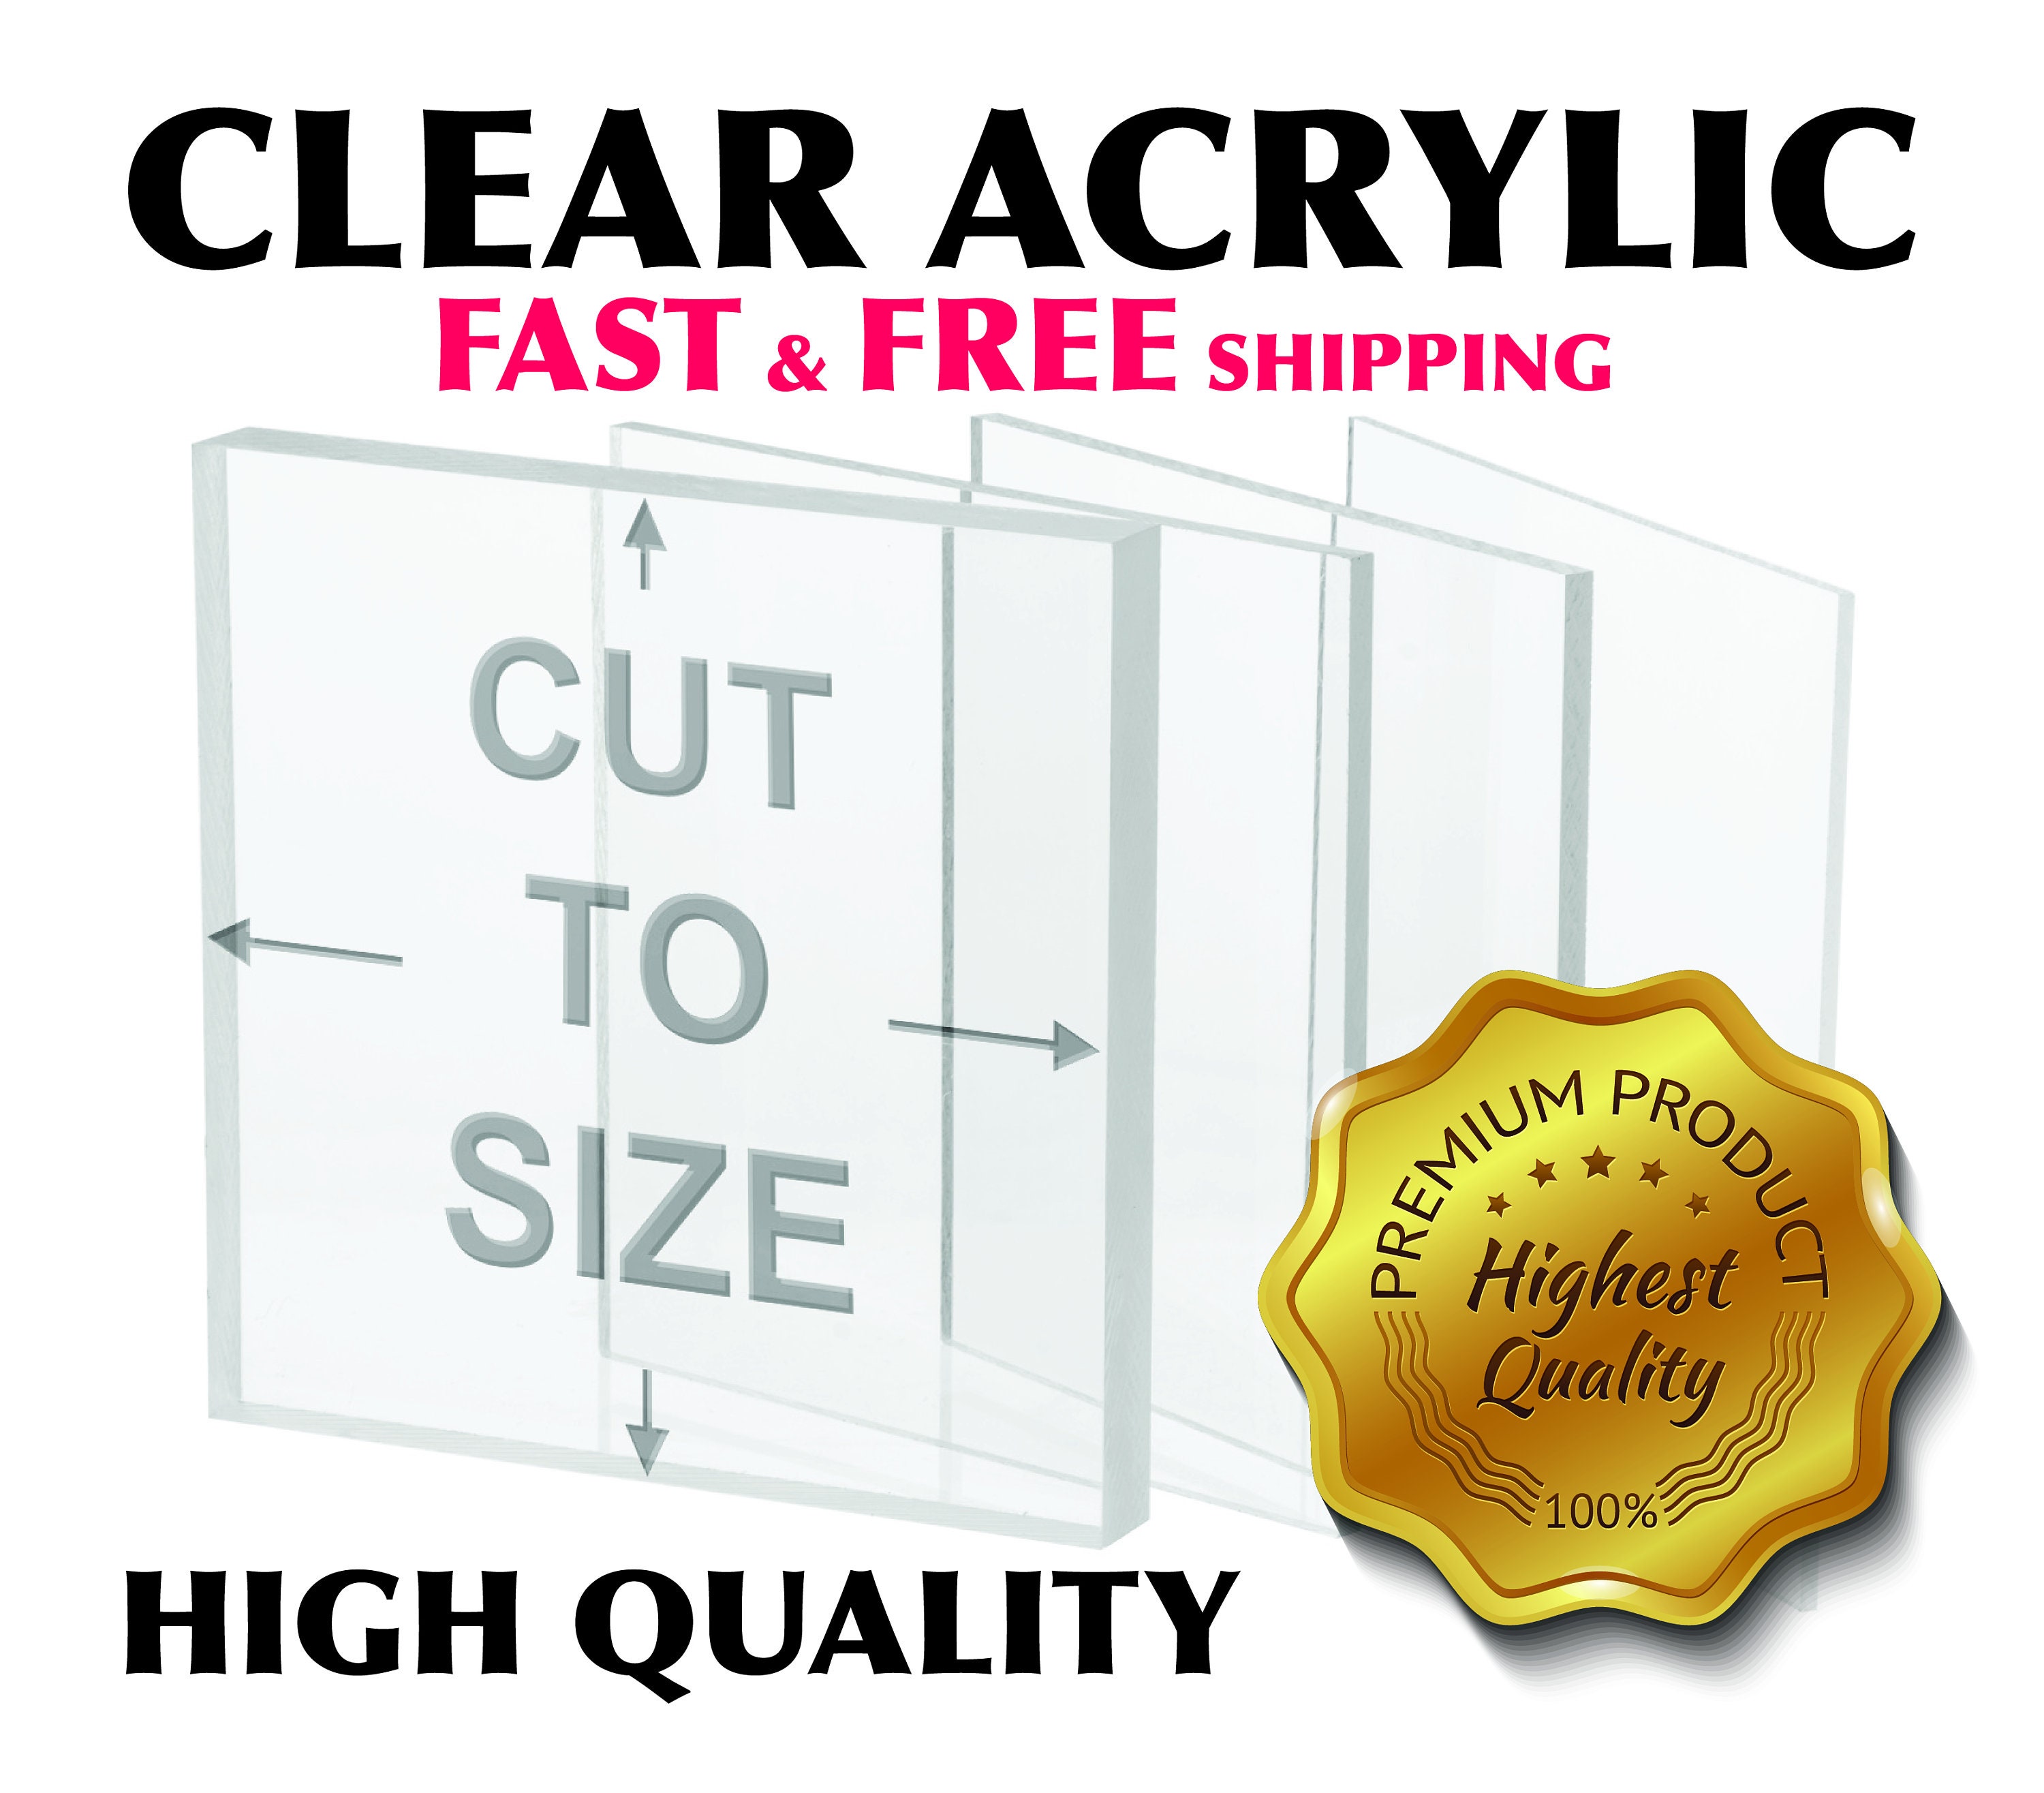 1/4 CUT ACRYLIC CIRCLES - With or without holes! Clear Acrylic Discs,  Clear Plexiglass Discs, Plastic Circles - Multiple Thicknesses!